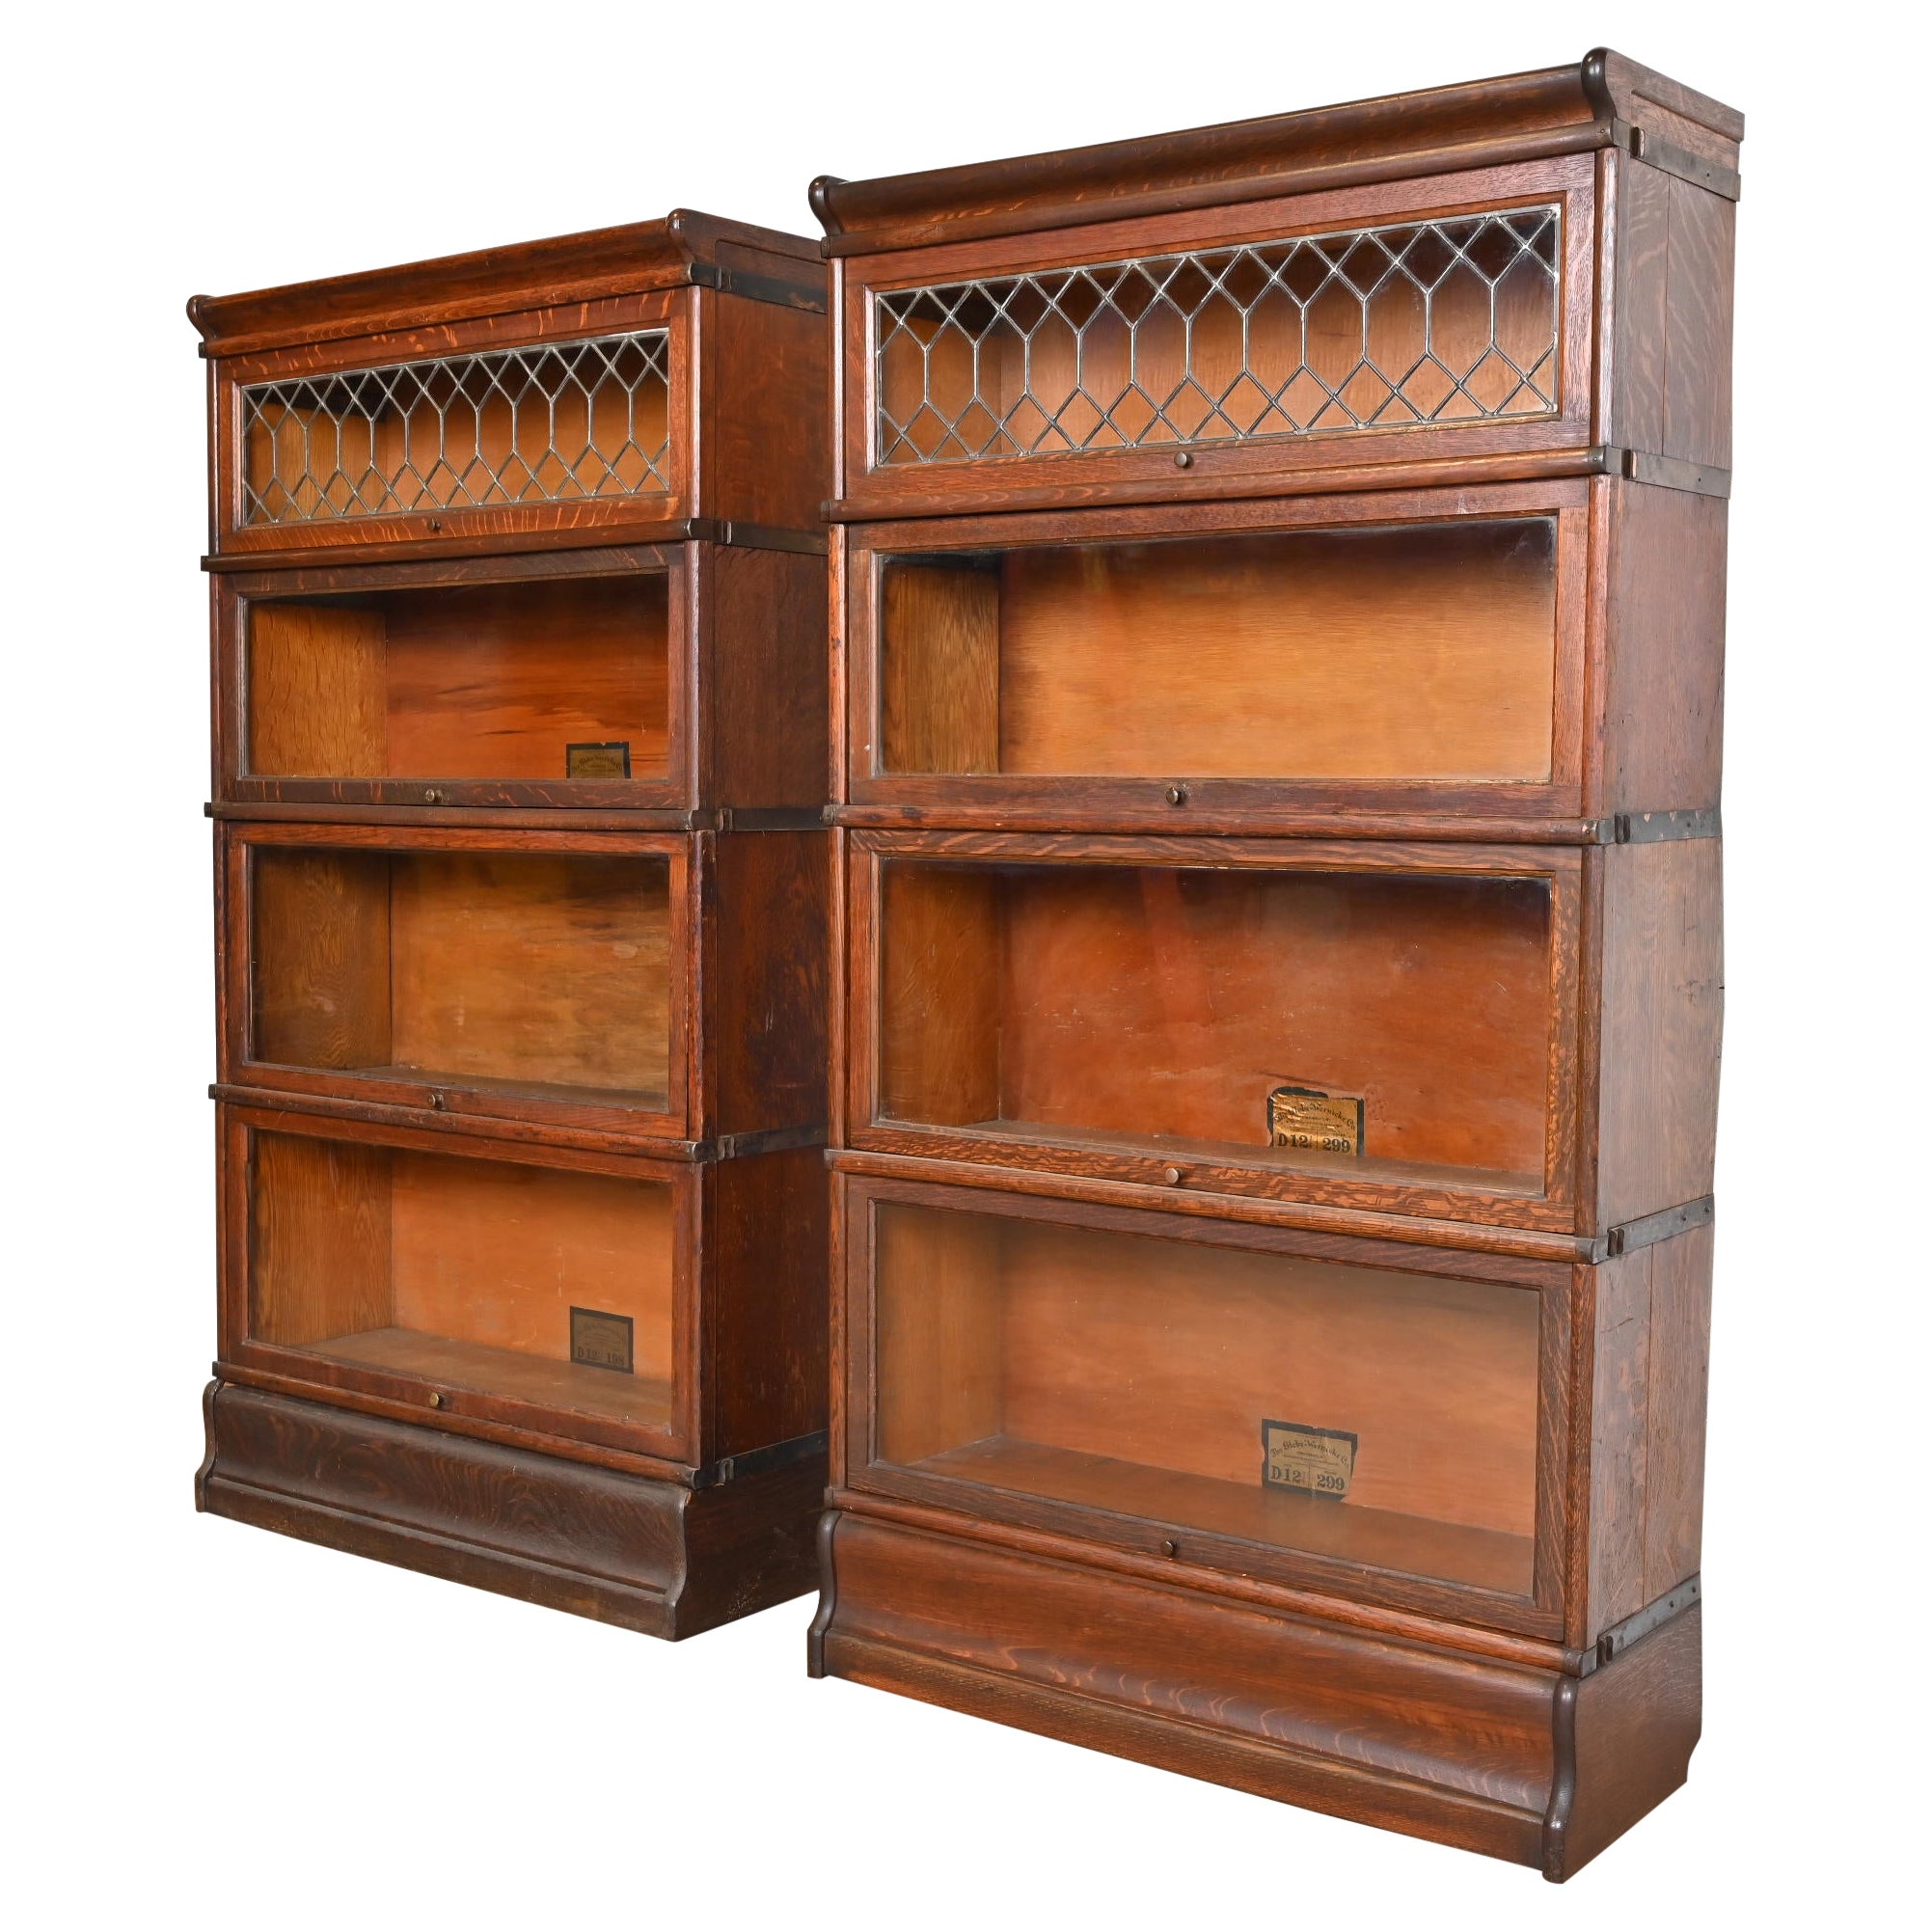 Globe Wernicke Arts & Crafts Oak Barrister Bookcases With Leaded Glass, Pair